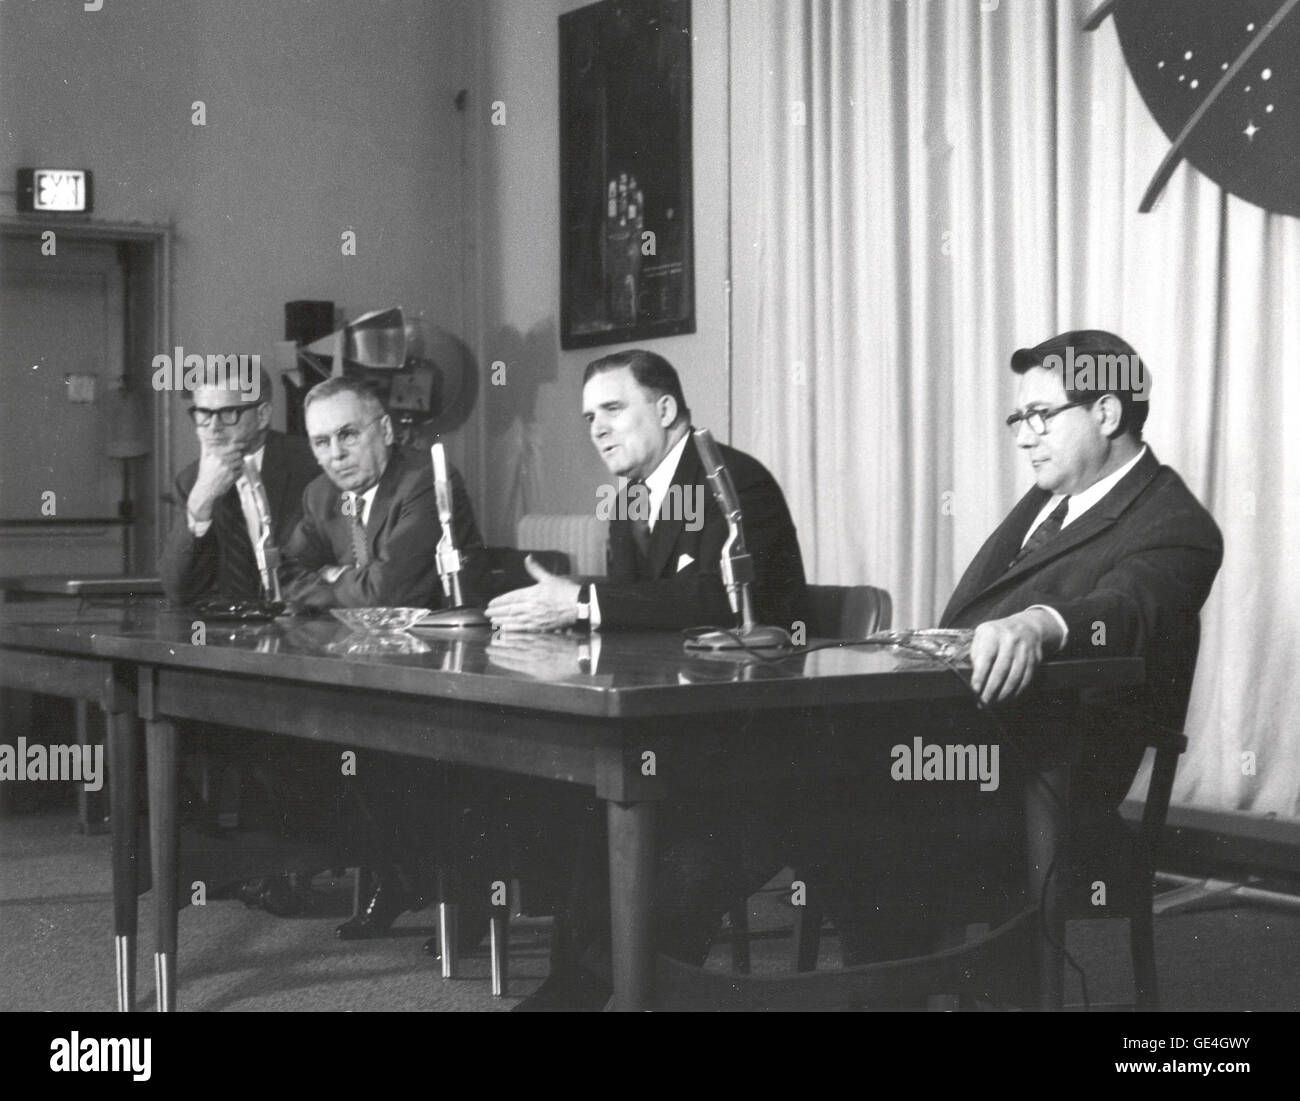 (April 12, 1961) After the successful spaceflight of Yuri Gagarin, the first person to fly in space, as well as orbit Earth, NASA held a press conference at NASA Headquarters in Washington, DC to respond to questions concerning Gagarin's flight and the status of the American space program. From left to right: Dr. Robert C. Seamans Jr., Associate Administrator; Dr. Hugh L. Dryden, Deputy Administrator; Mr. James E. Webb, Administrator; and Dr. Abe Silverstein, Director of Space Flight Programs.   Image #:61-WEBB-2 Stock Photo